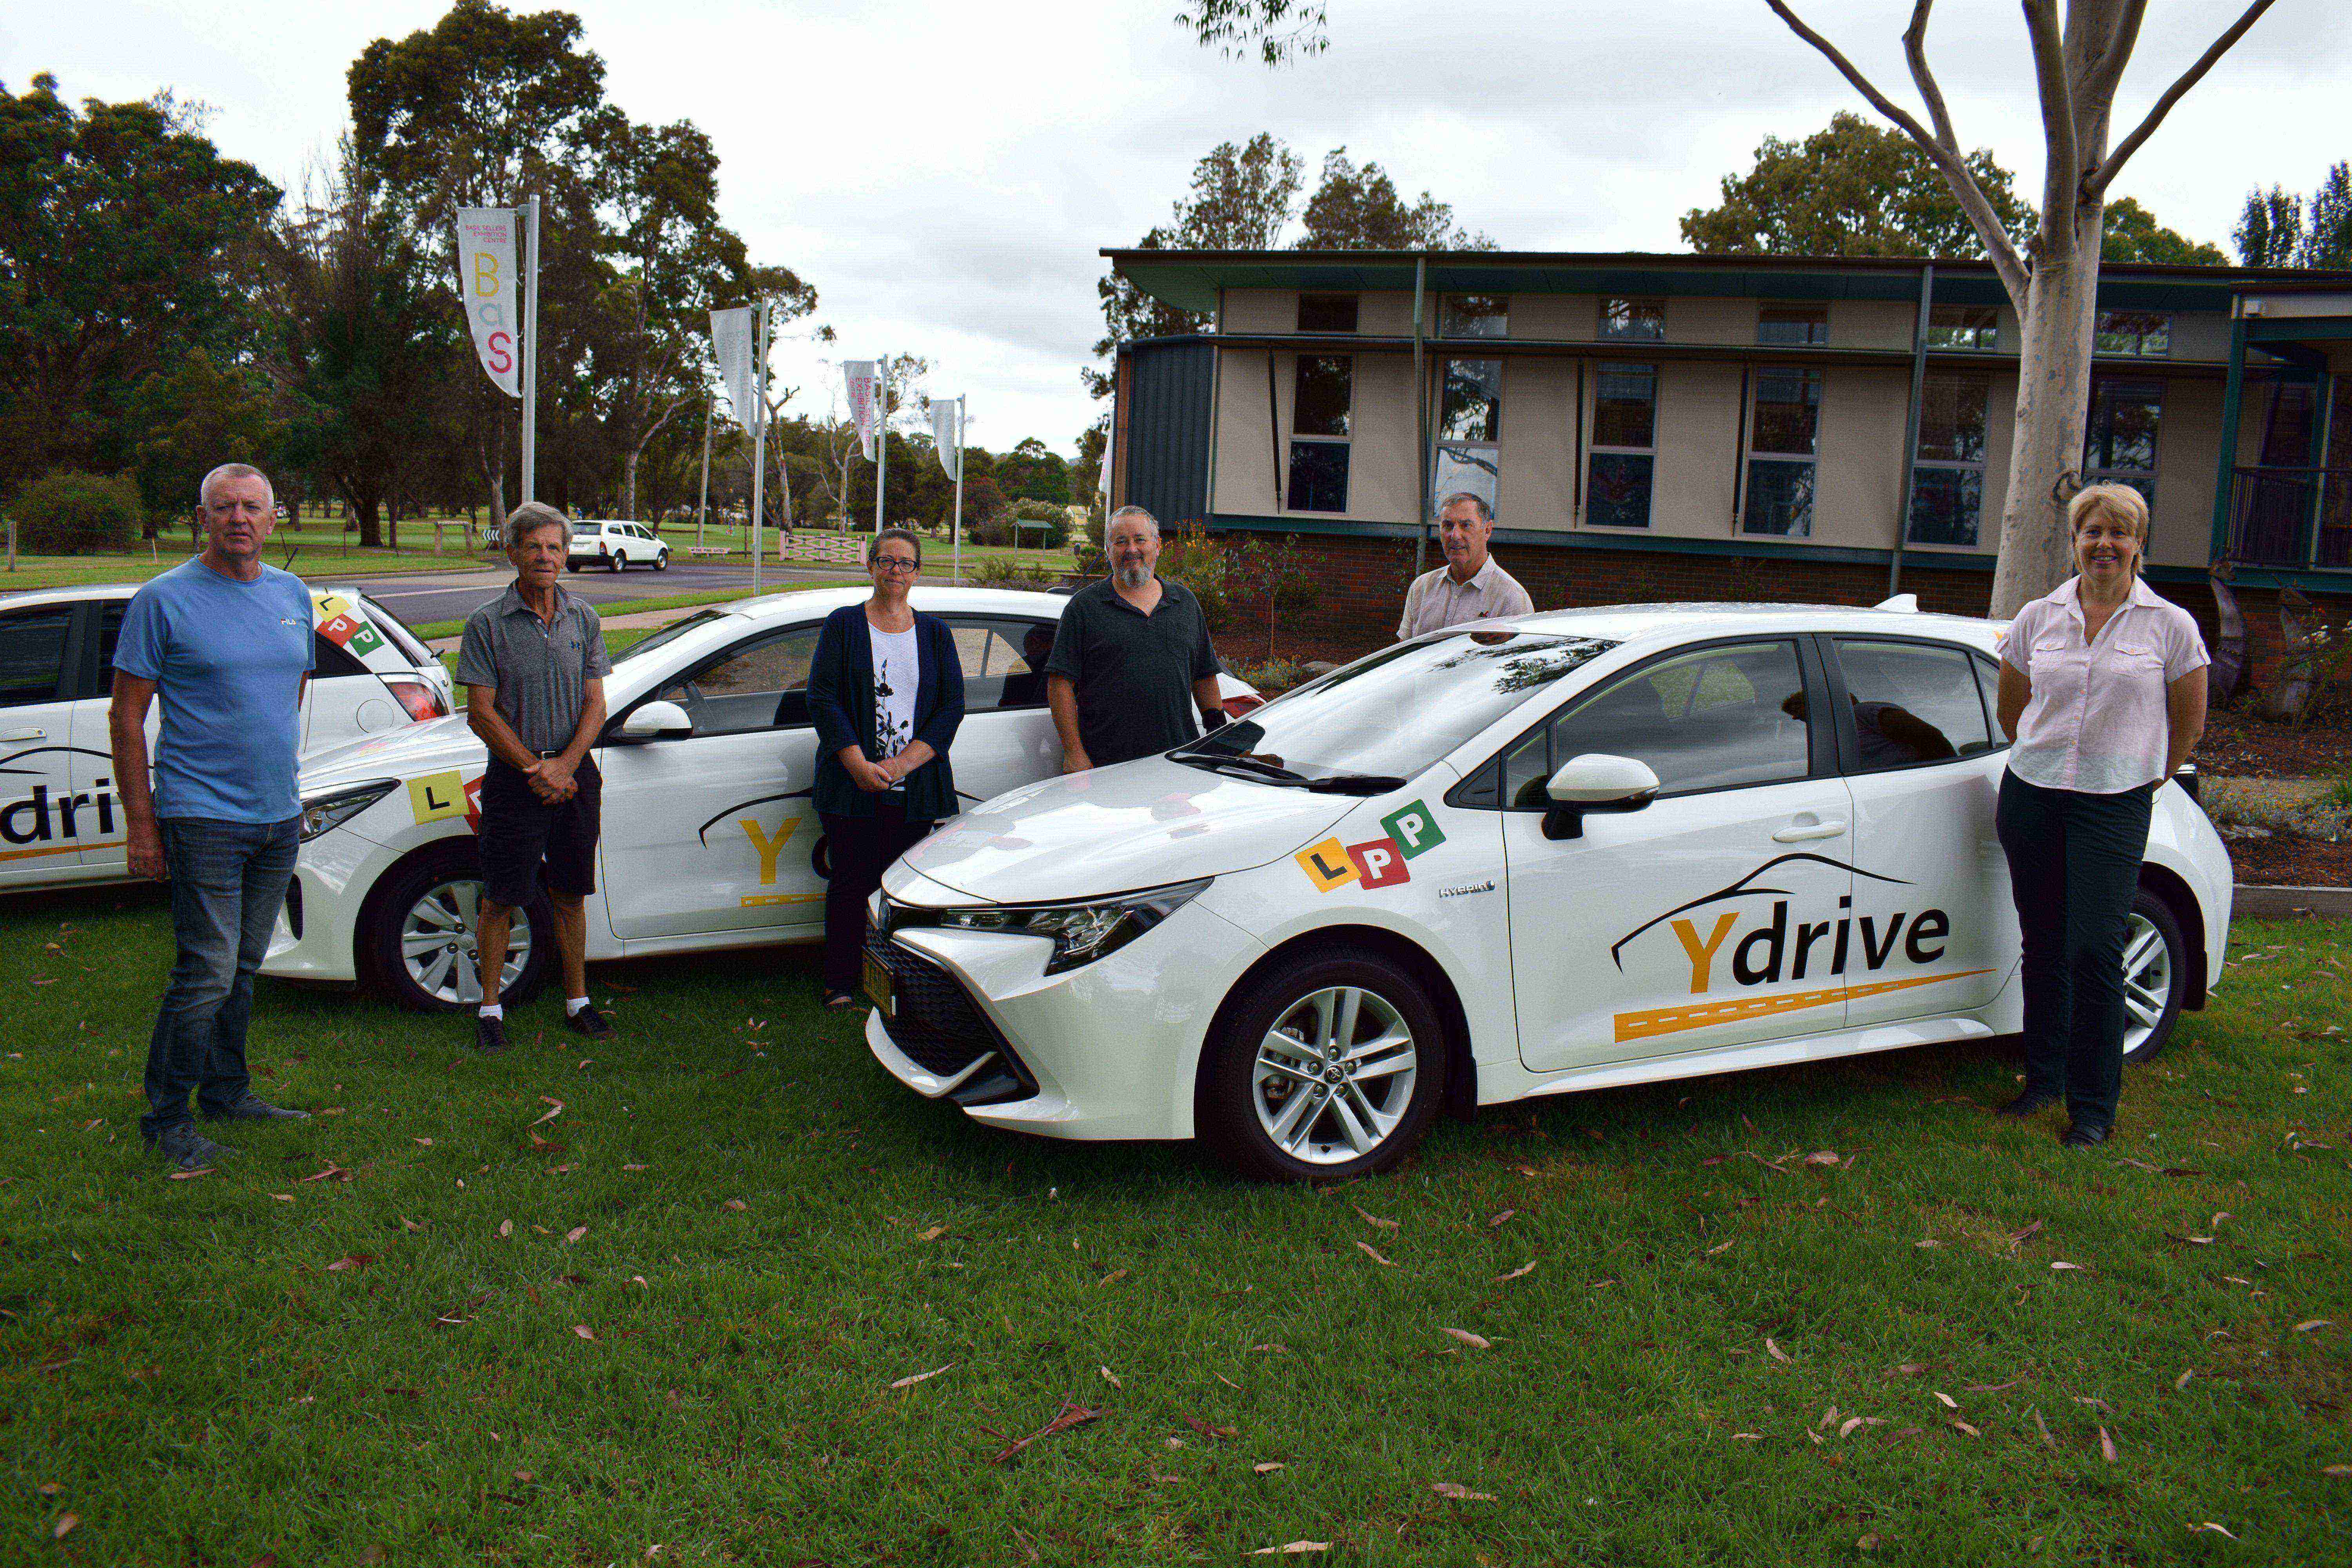 'Y drive' gears up for new learners in the Eurobodalla